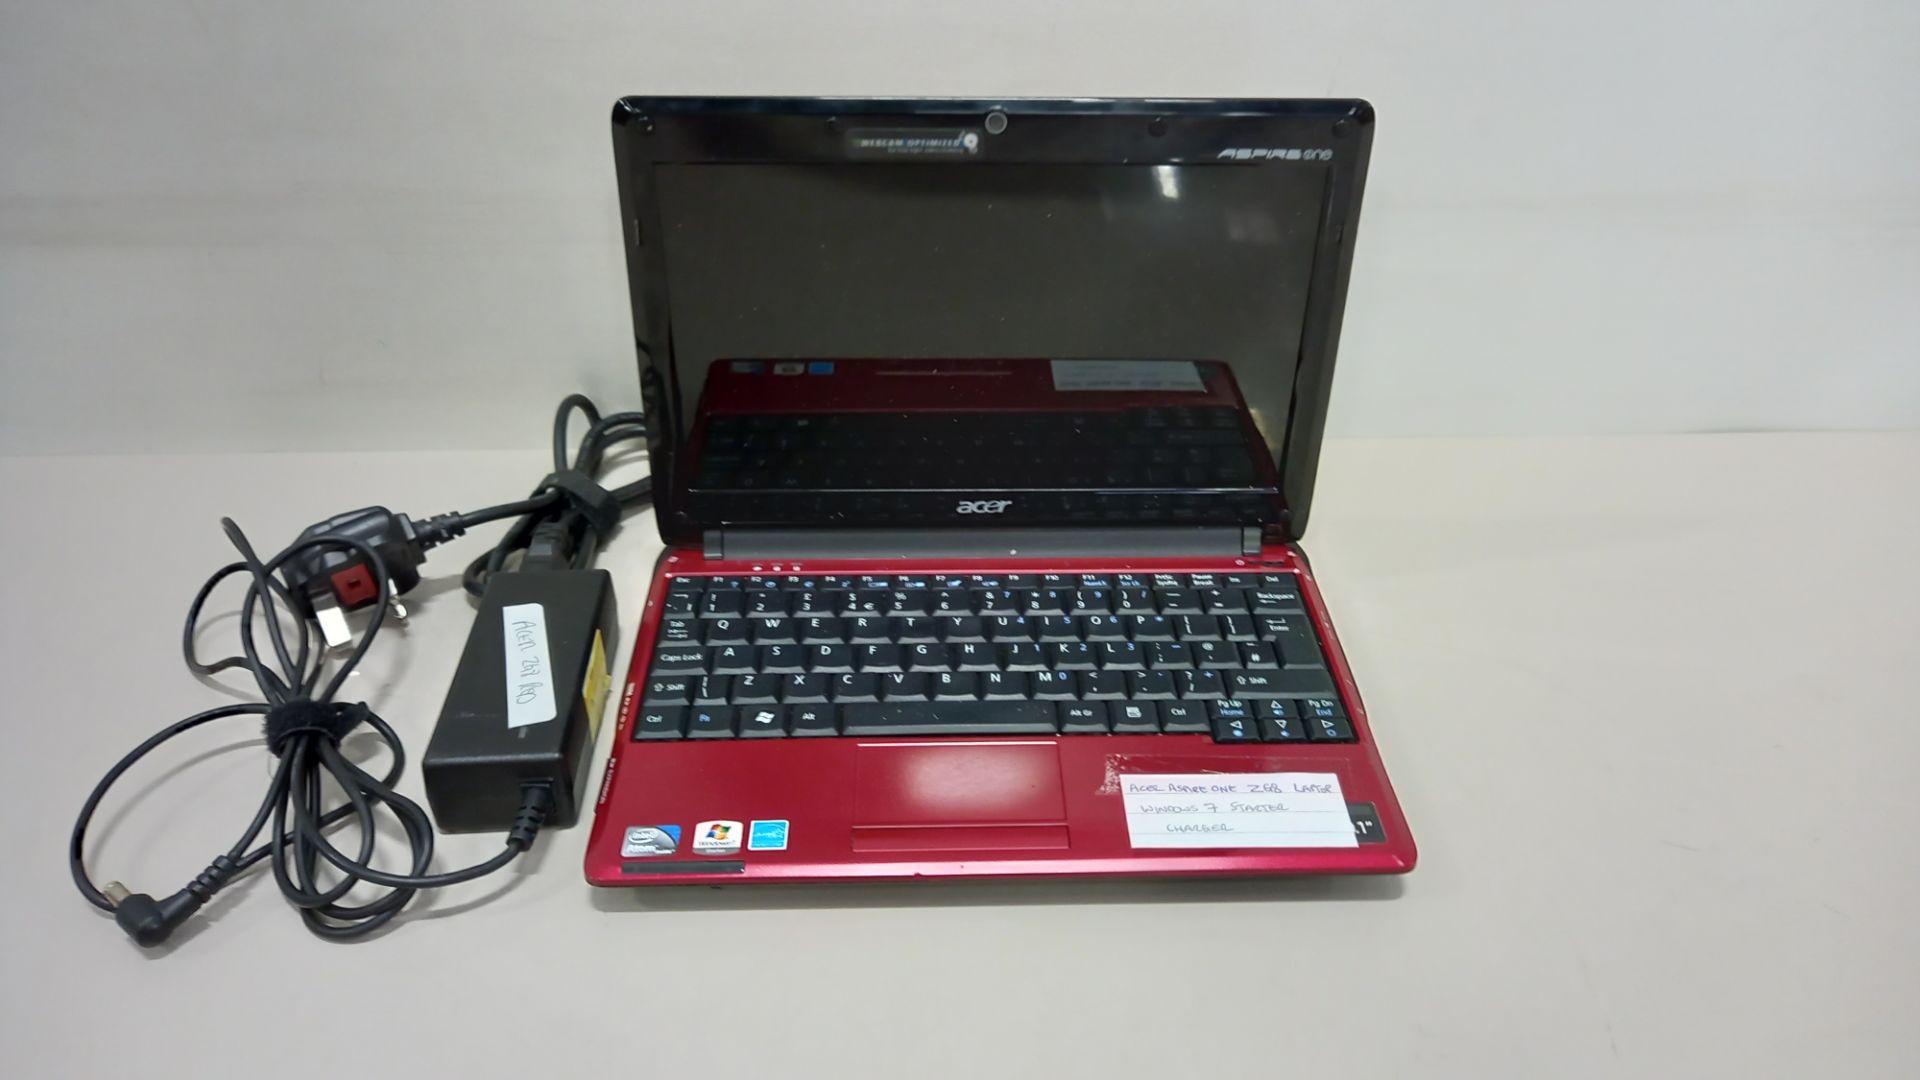 ACER ASPIRE ONE ZG8 LAPTOP WINDOWS 7 STARTER - WITH CHARGER